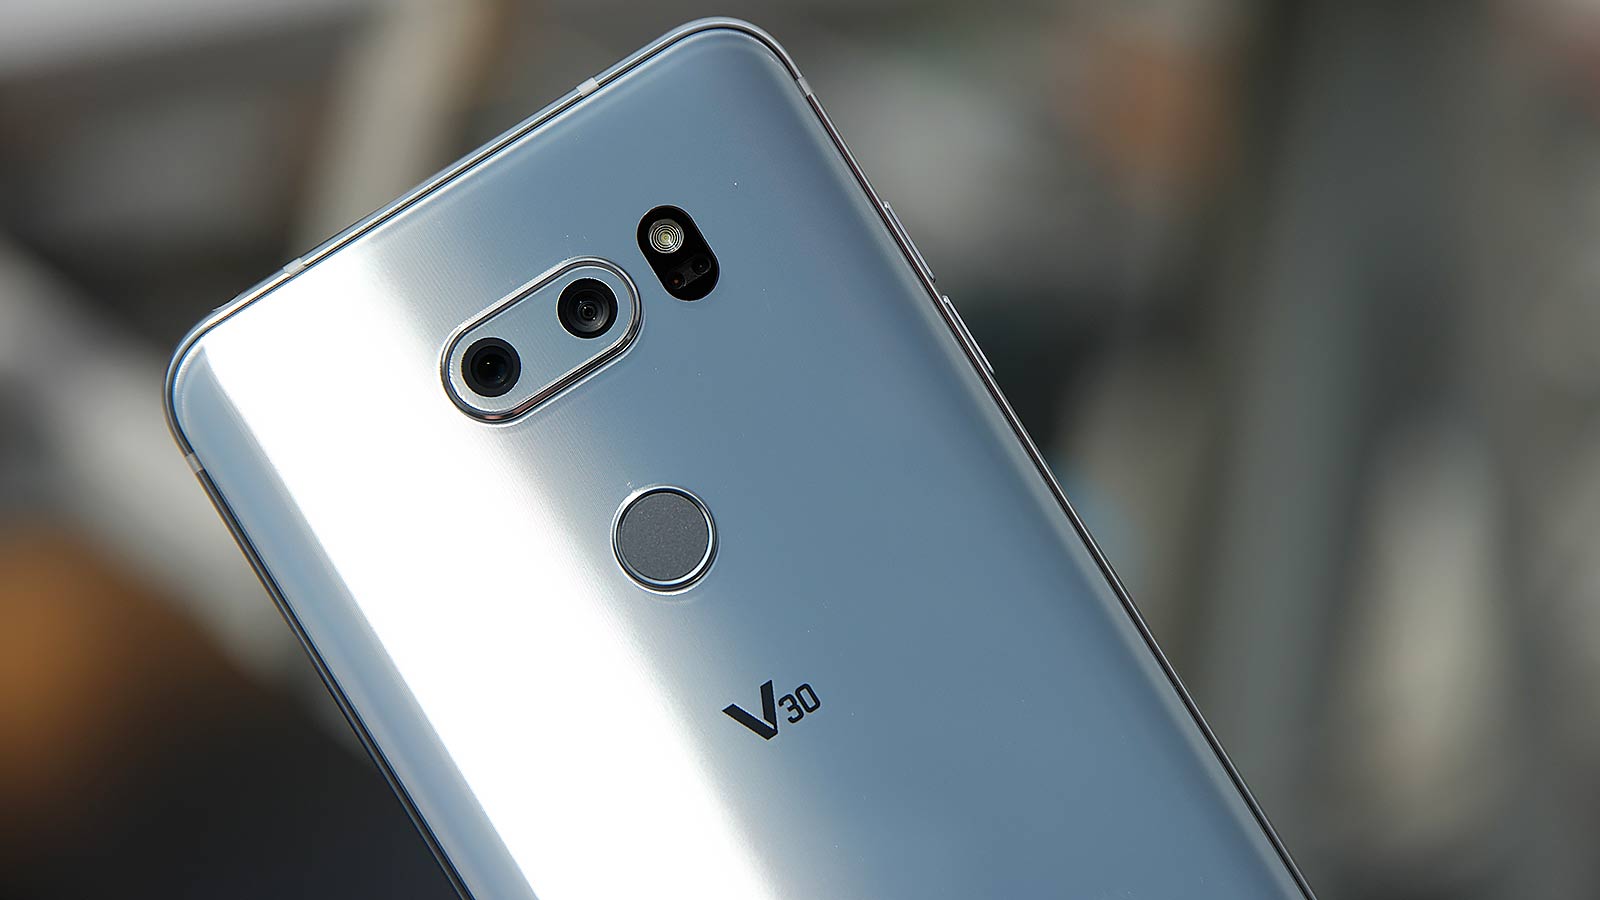 The LG V30 Sold Its Soul For Mainstream Appeal, But Hey, Its Camera And Audio Are Even Better